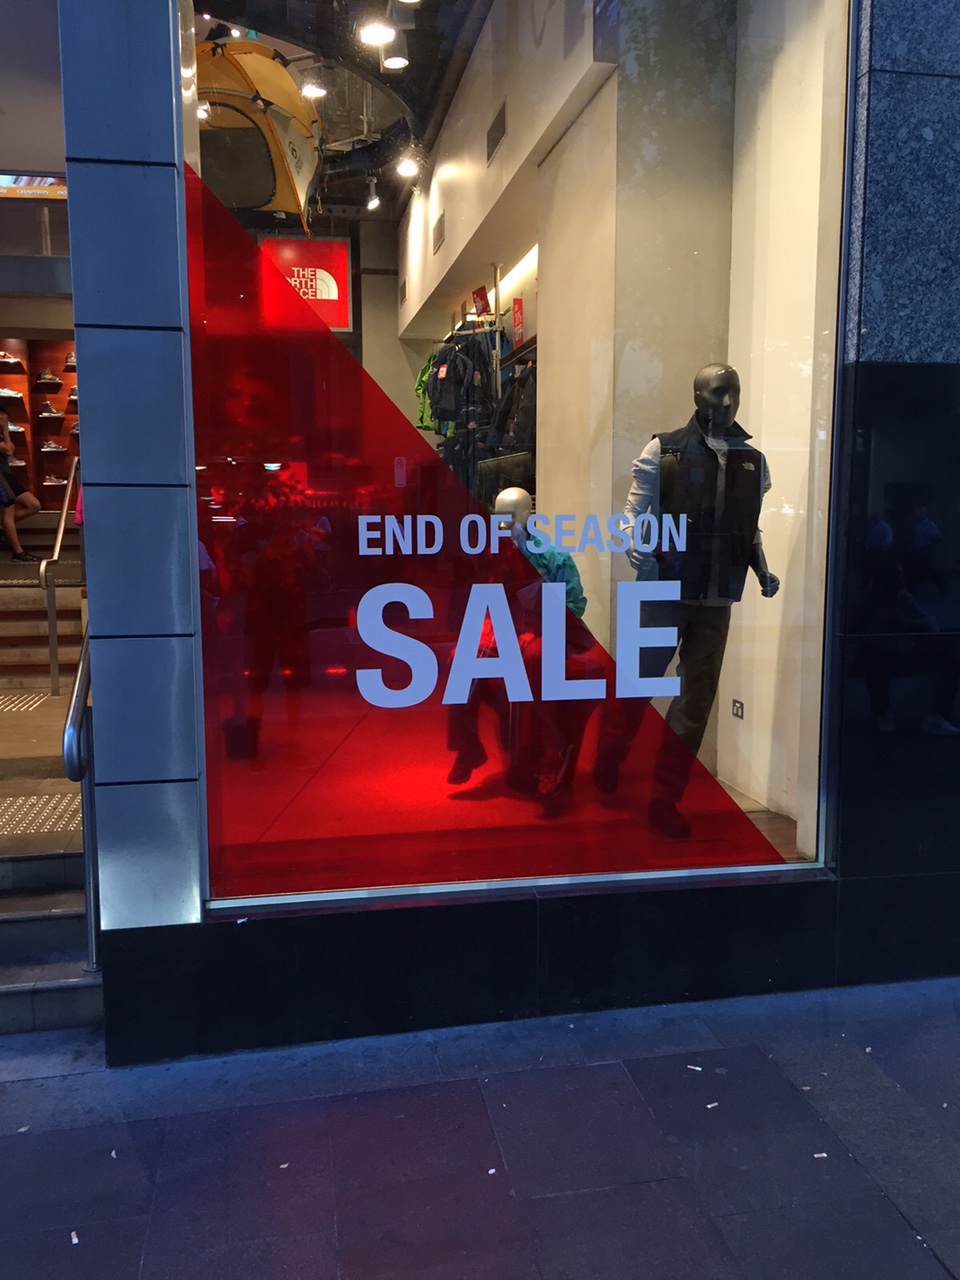 the north face end of season sale